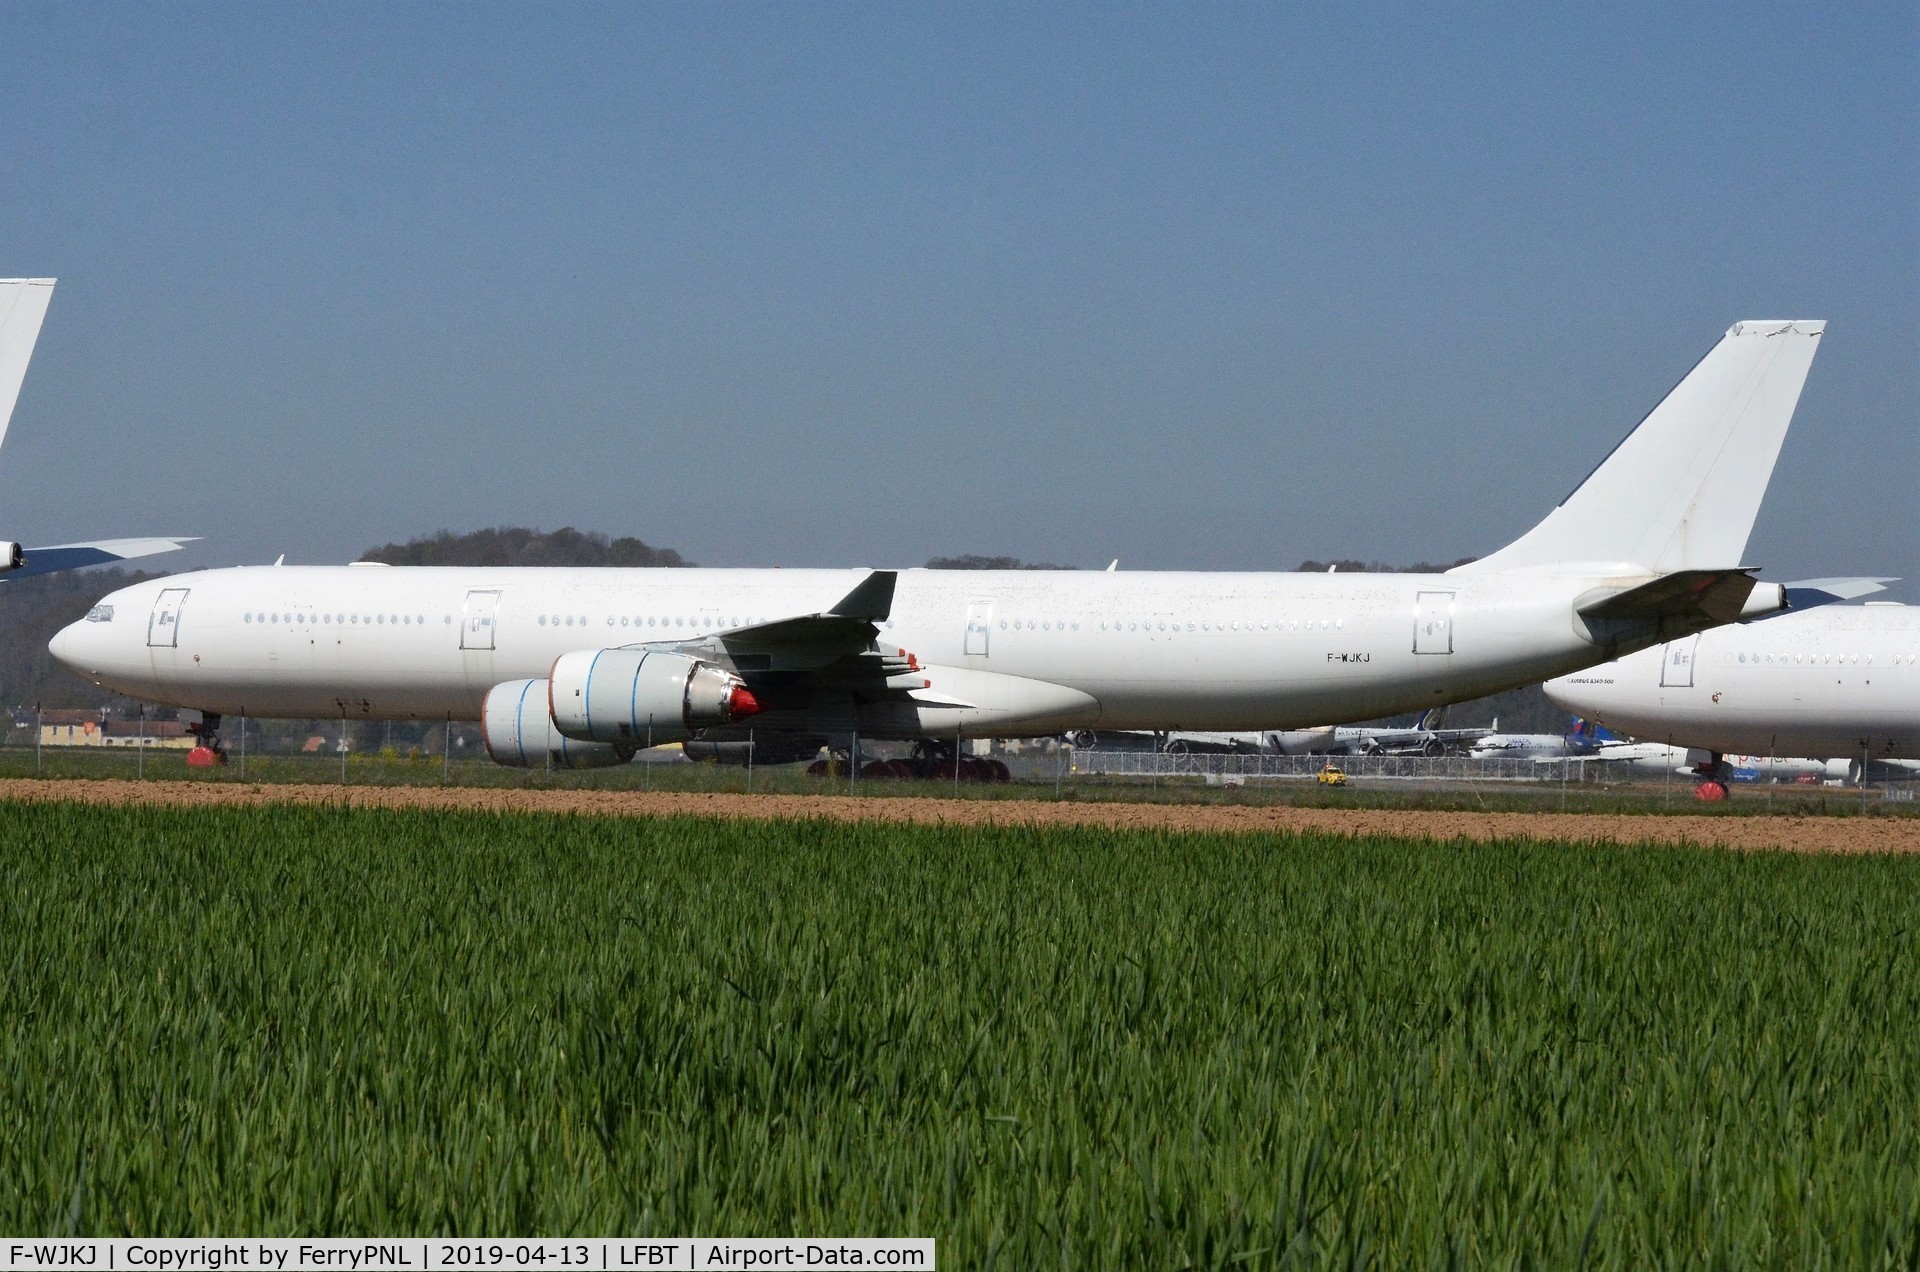 F-WJKJ, 2003 Airbus A340-541 C/N 478, Former Singapore A345 (9V-SGC) stored in Tarbes.